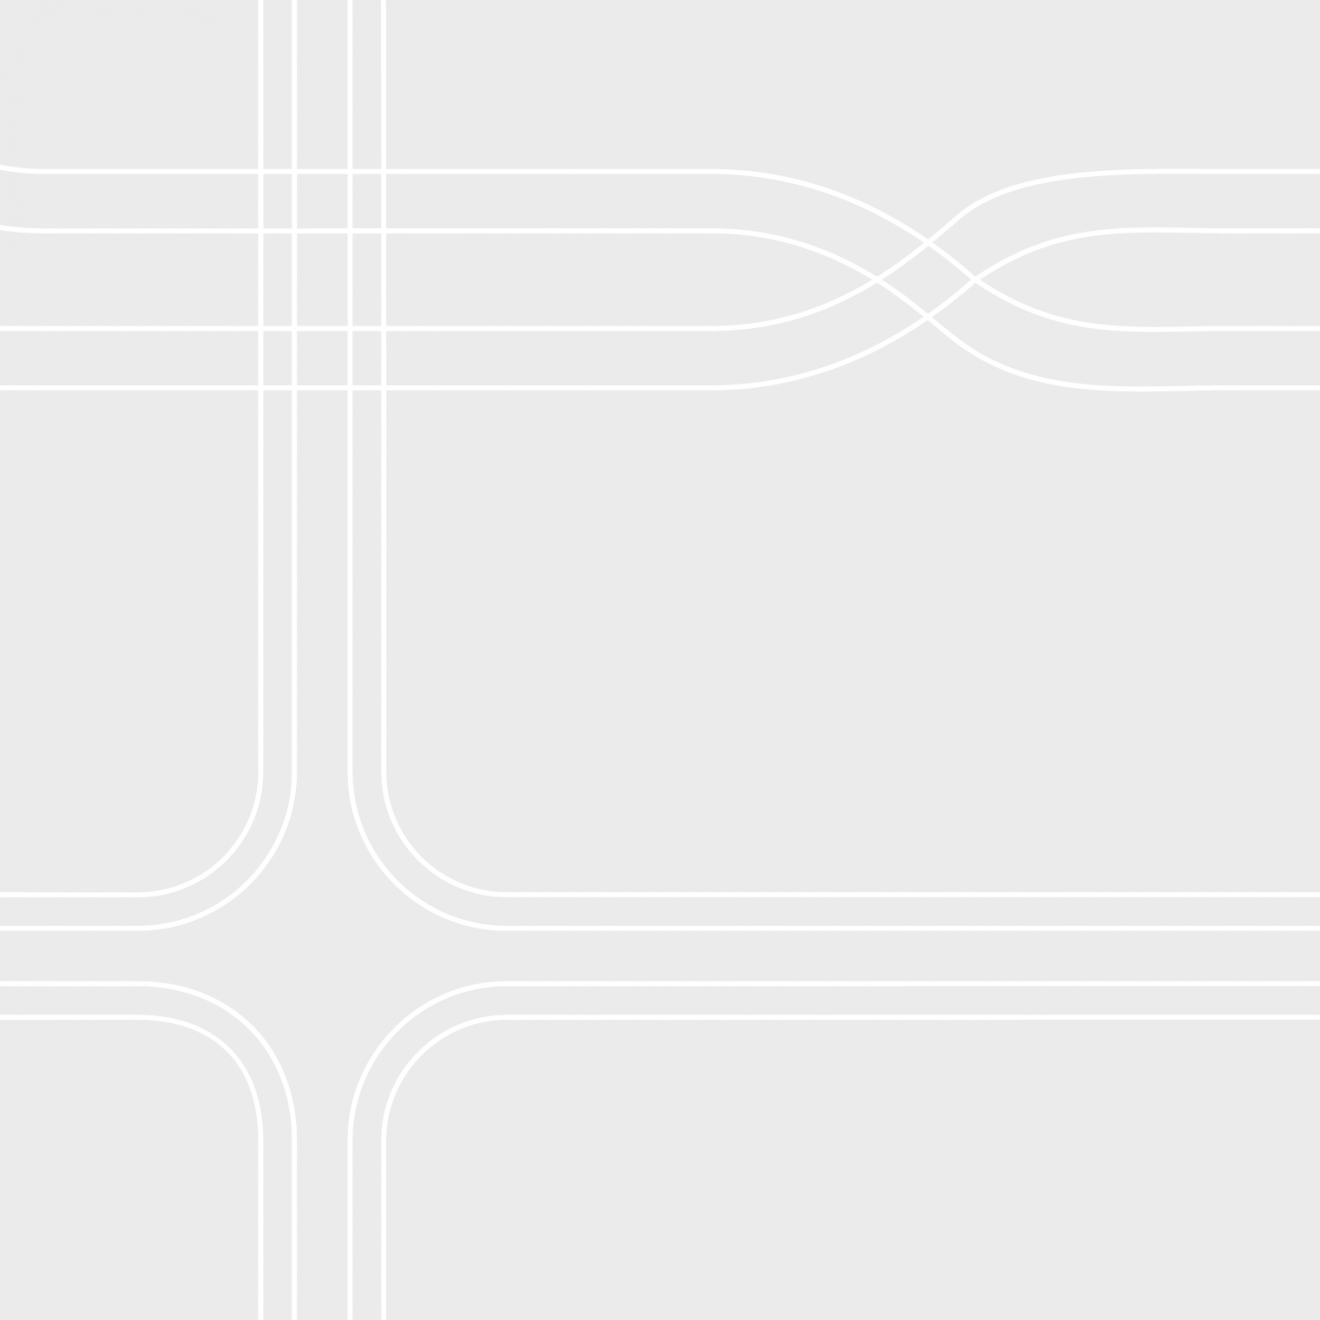 Light grey background with fine white lines crossing in a T shape